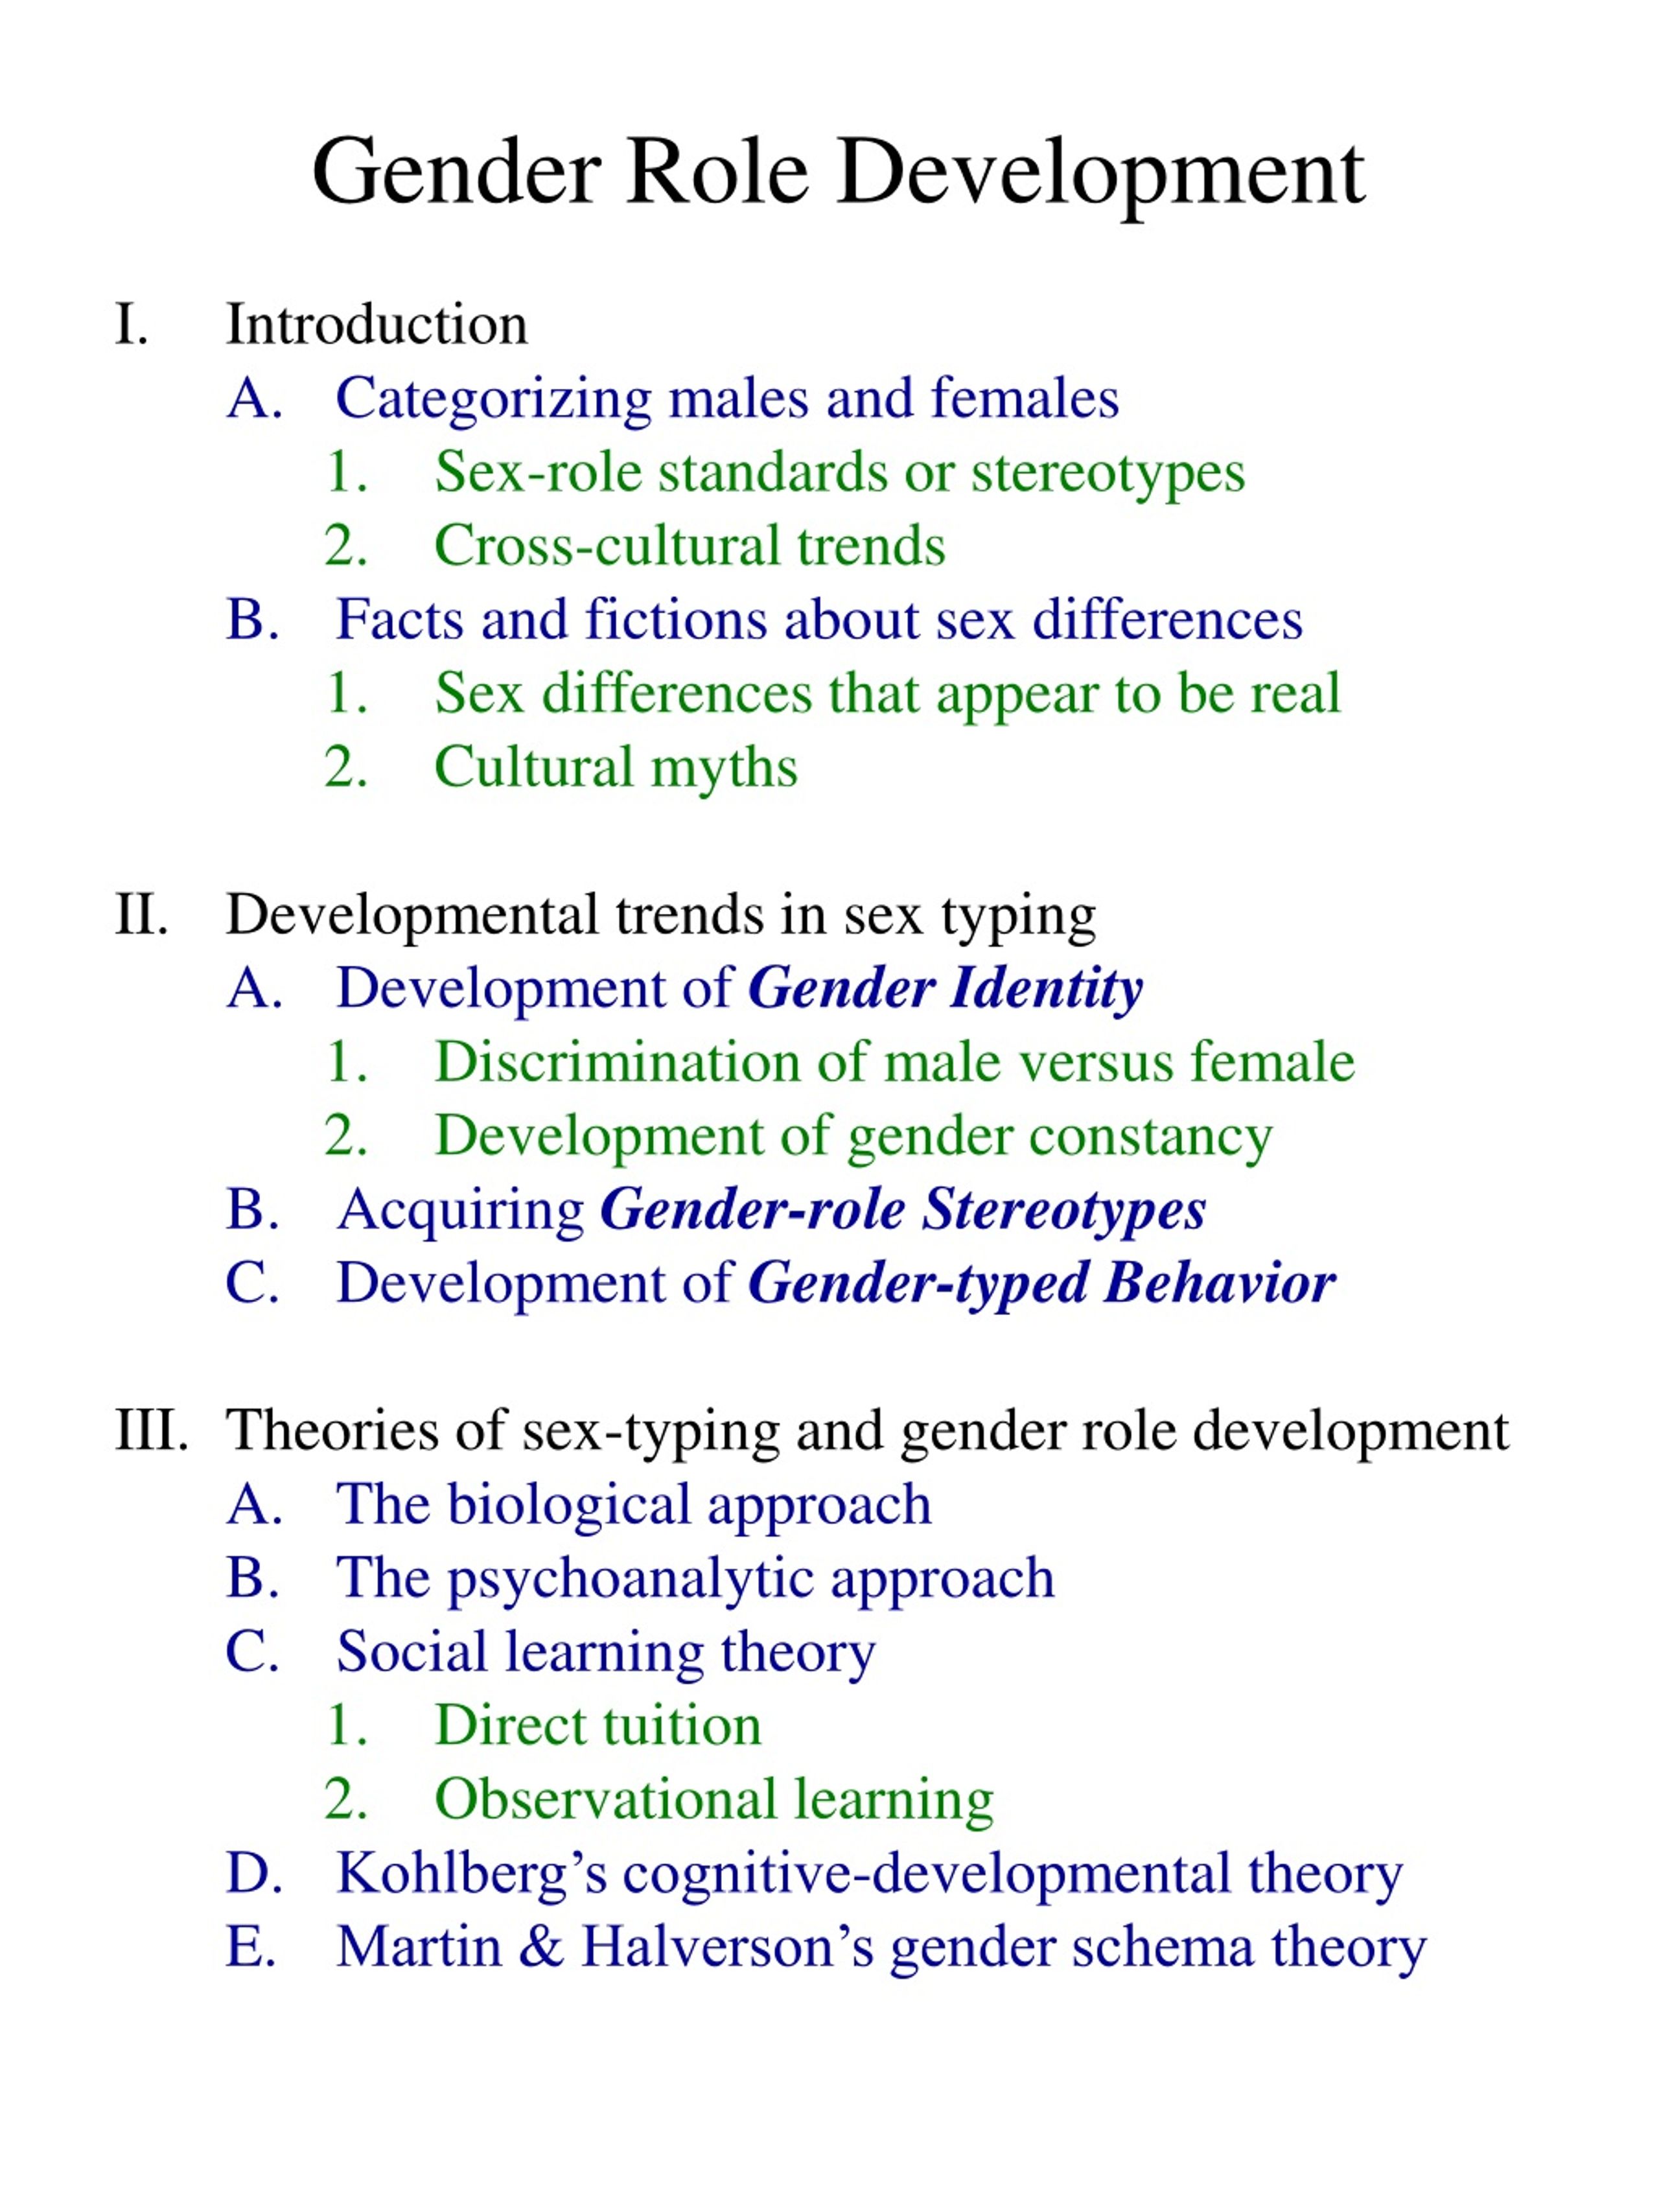 research topics gender role